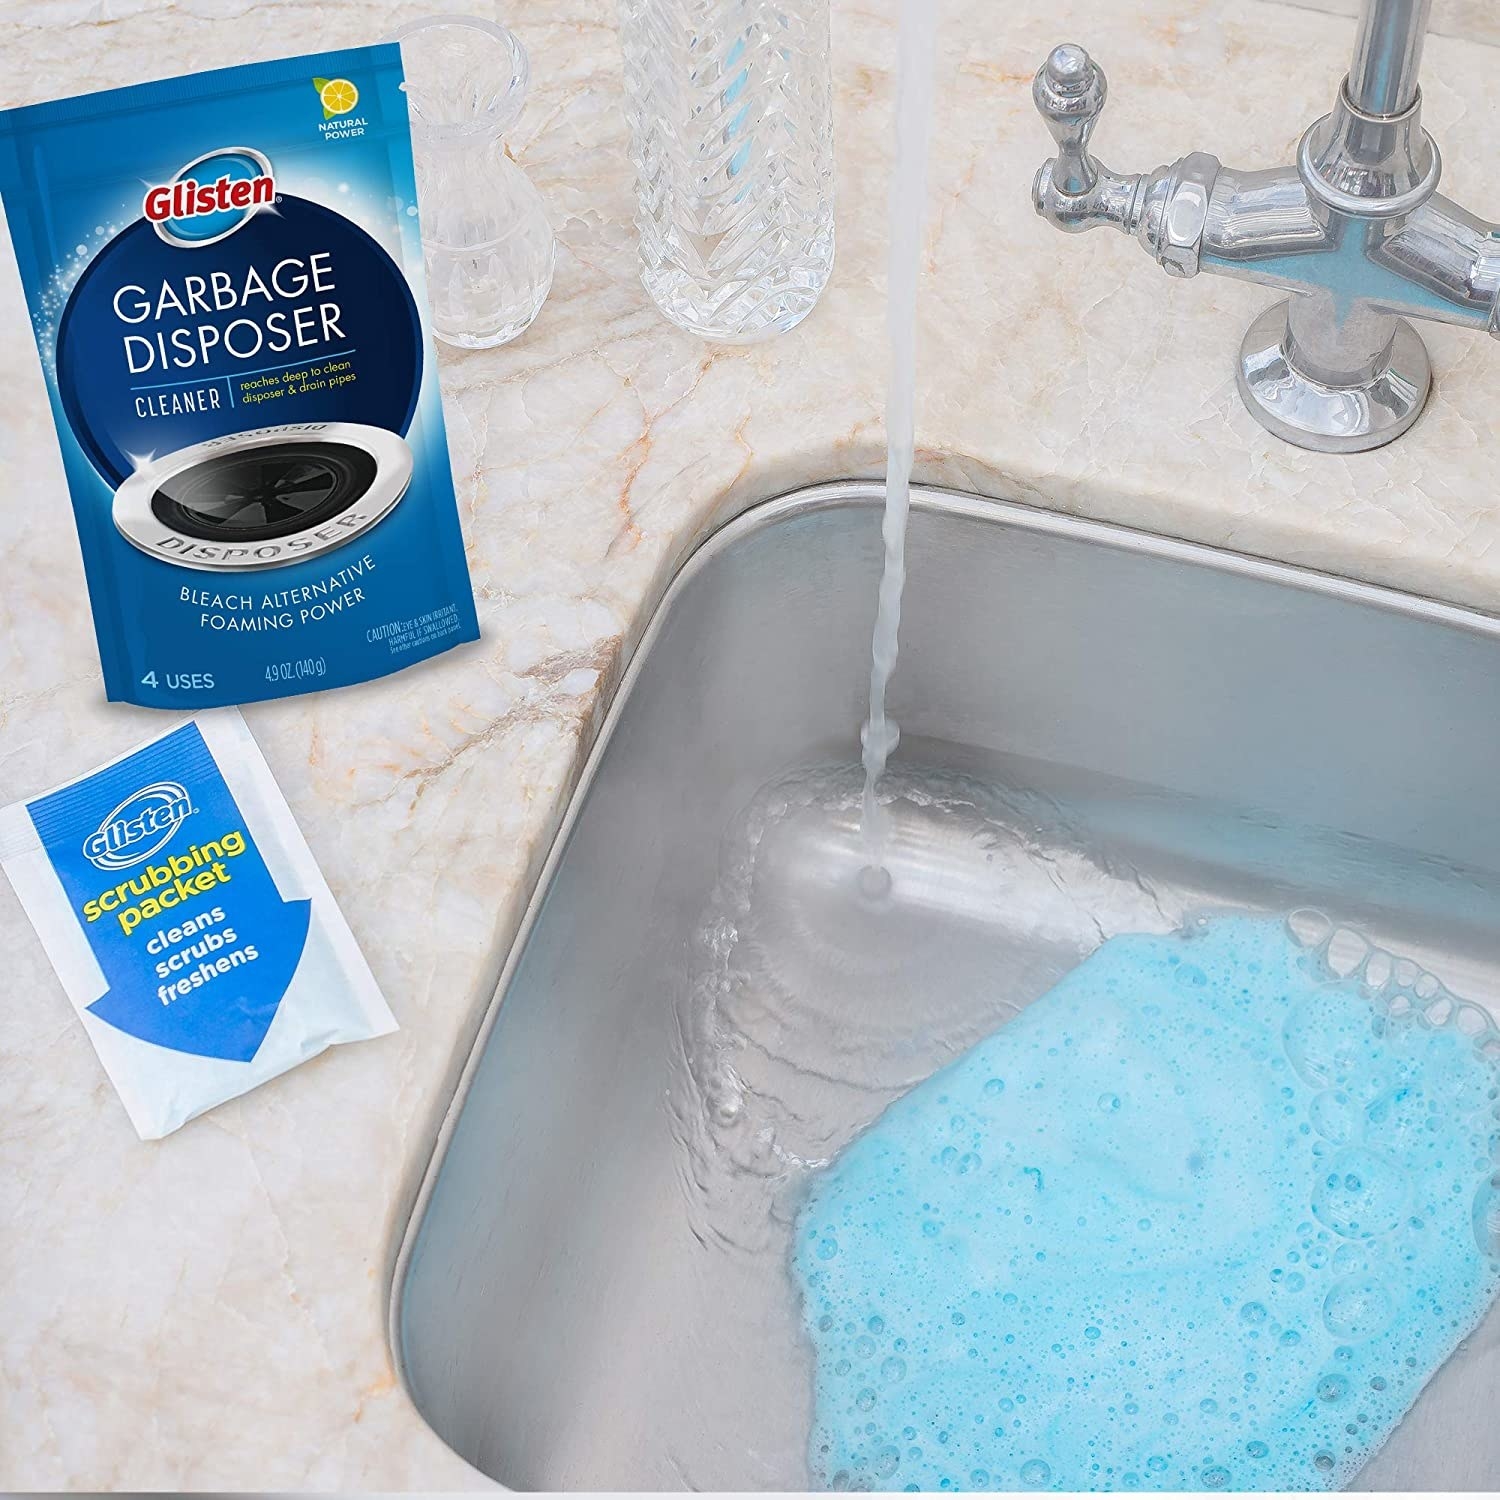 Garbage disposer packaging and packet with blue foam in the sink